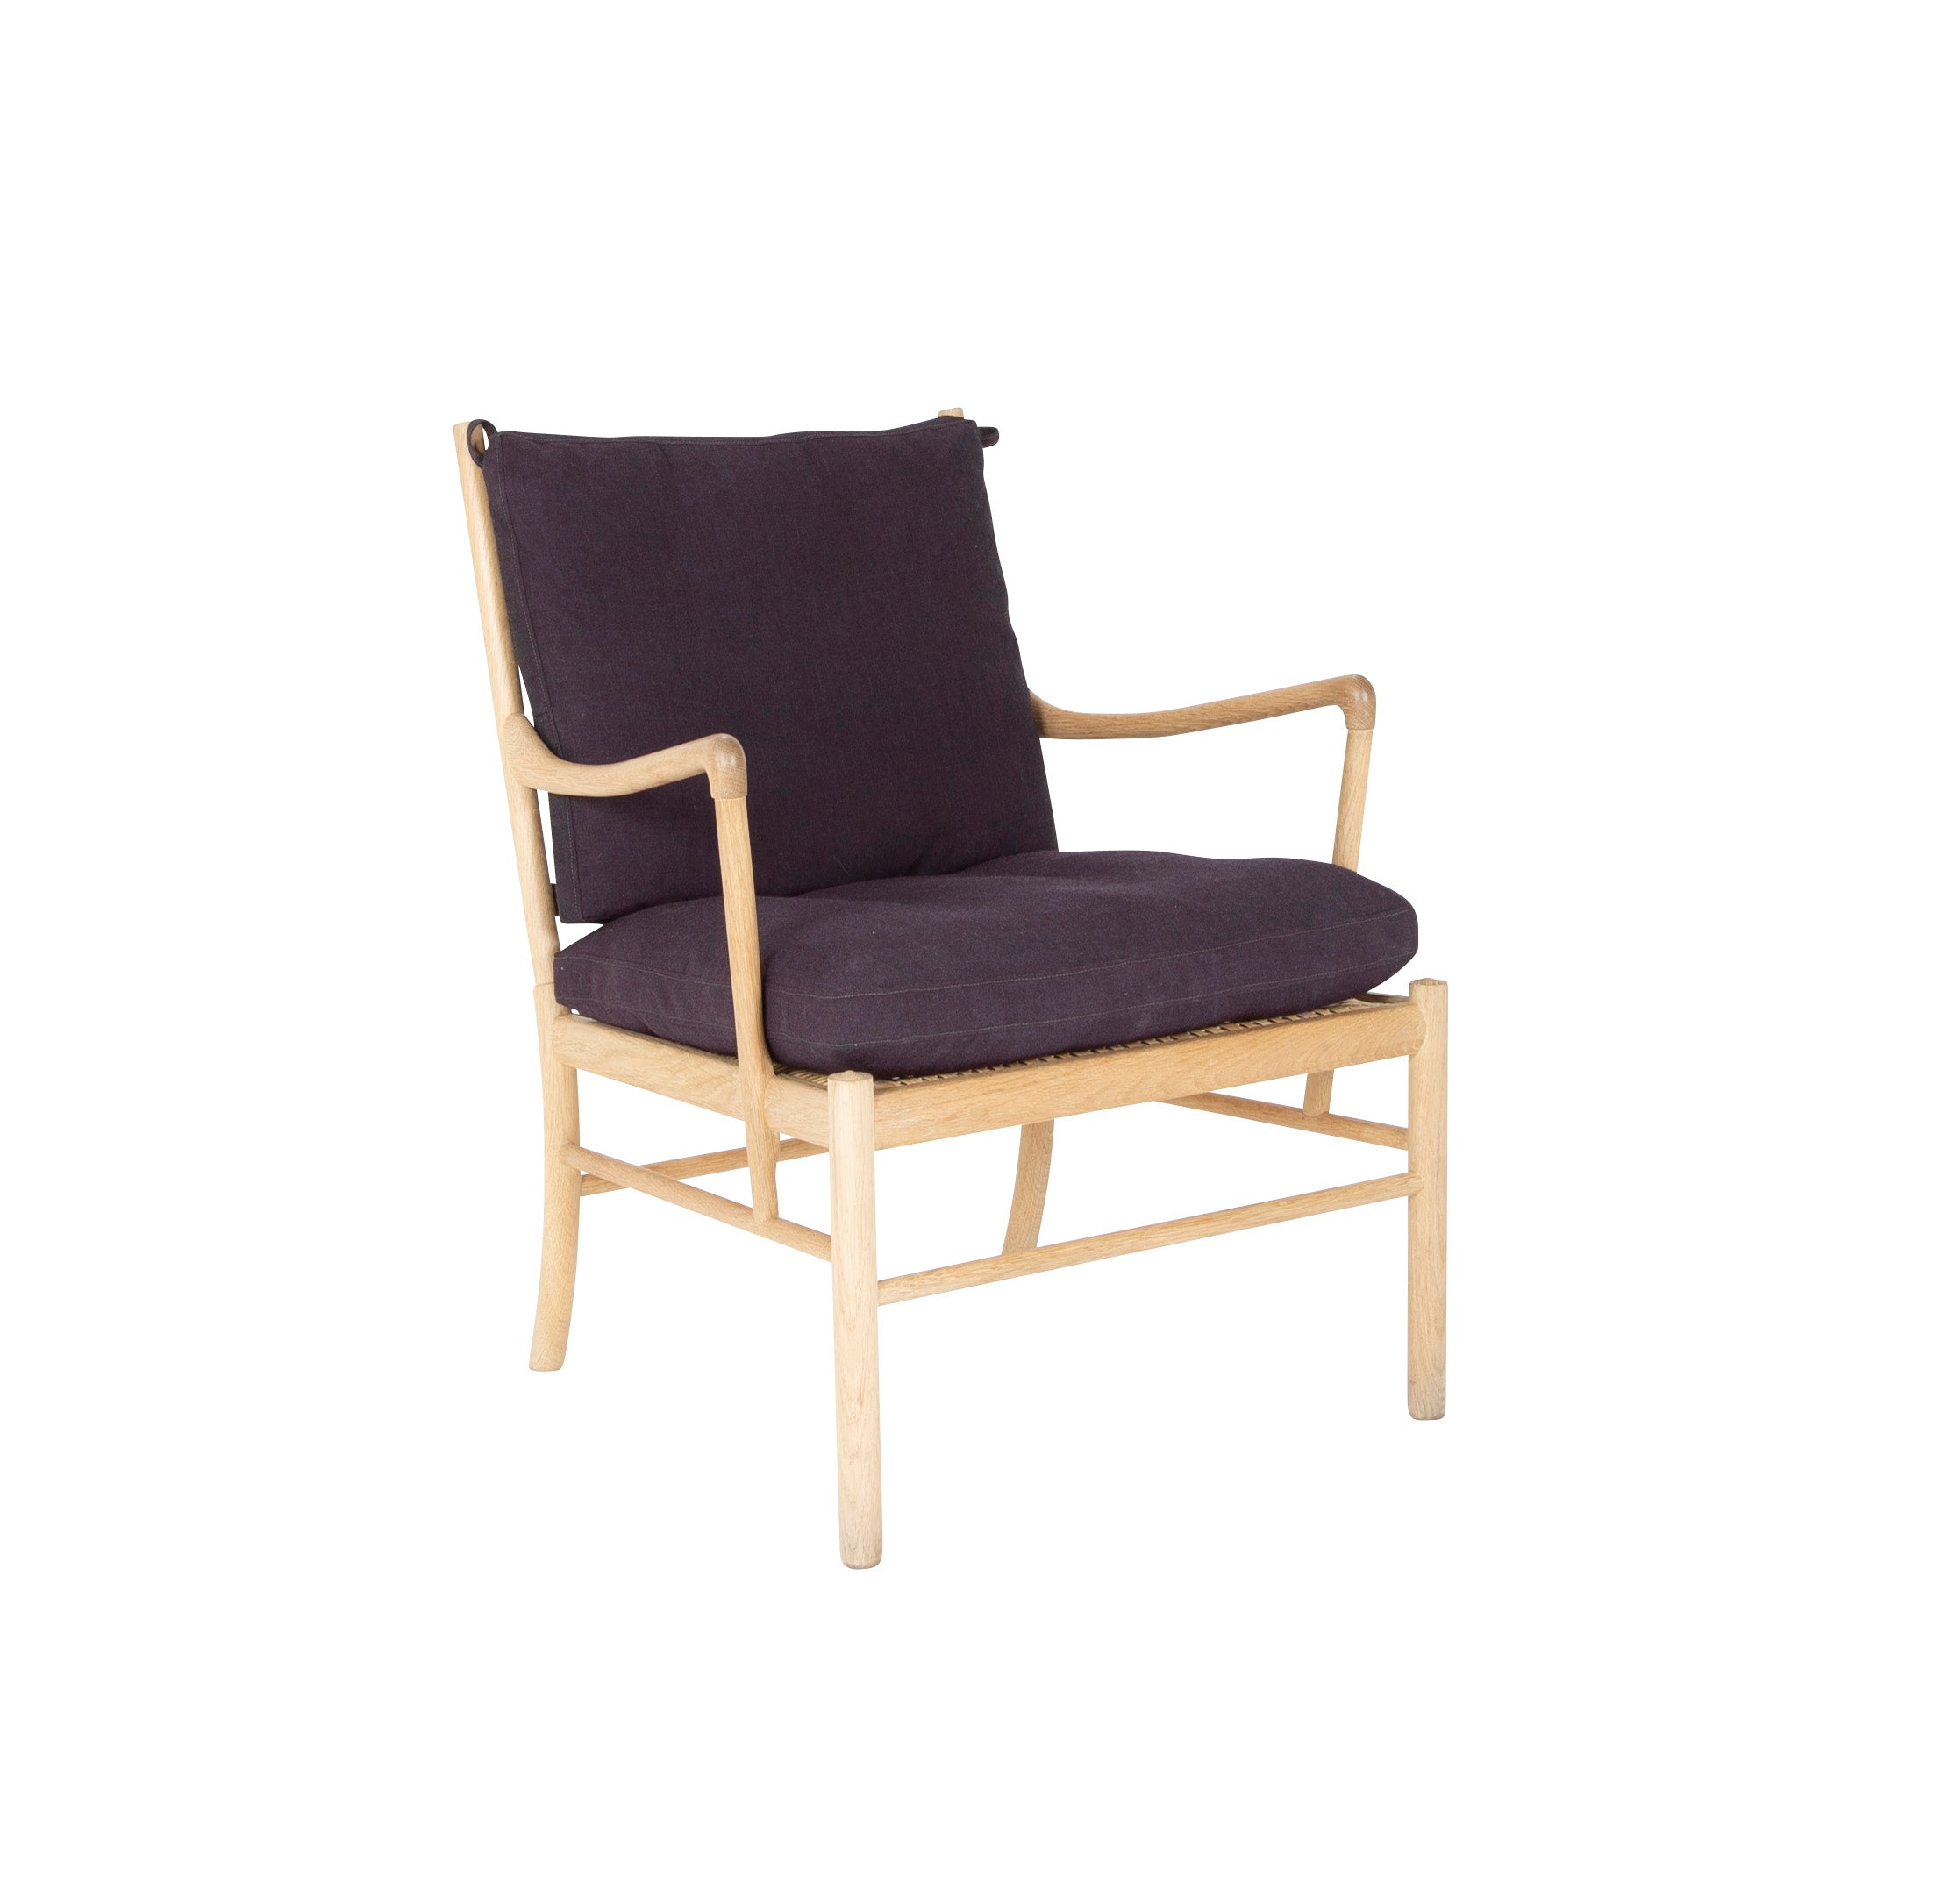 Ole Wanscher 'Colonial Chair' 'OW 149' for Carl Hansen & Sons